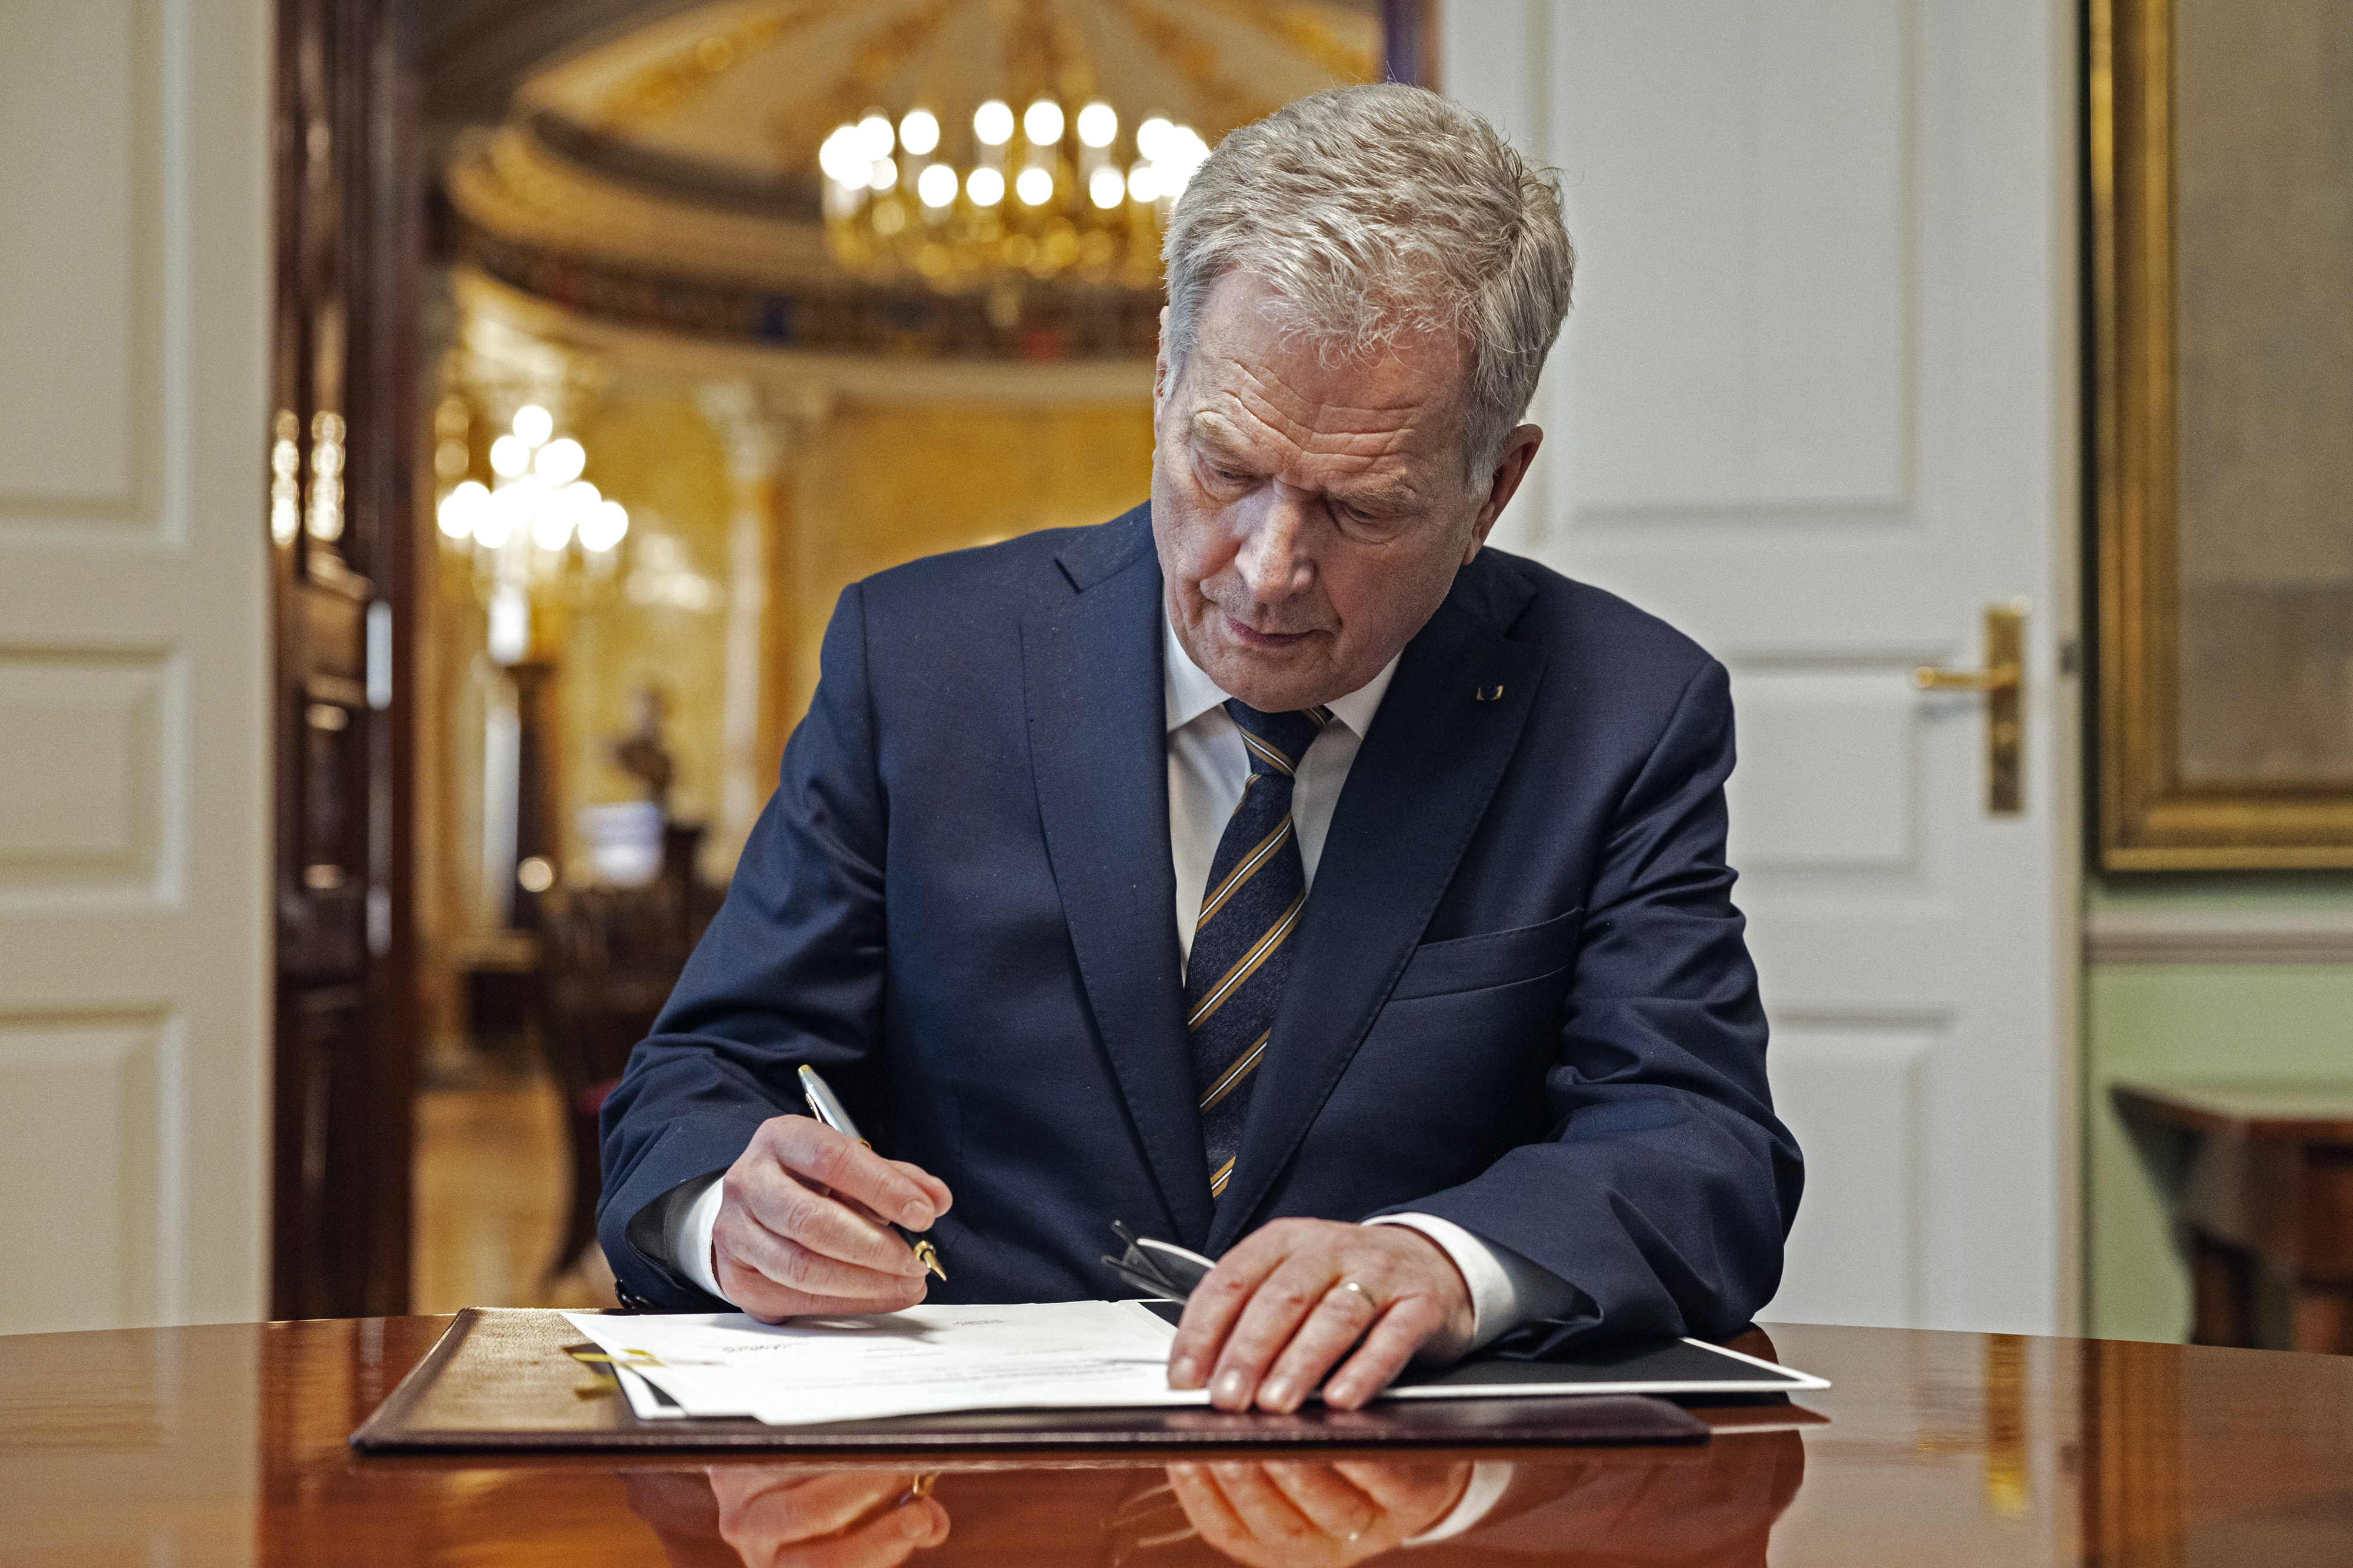 Sauli Niinistö, Finland's president, signs a domestic law which ratifies NATO treaties in Helsinki, Finland, on March 23.